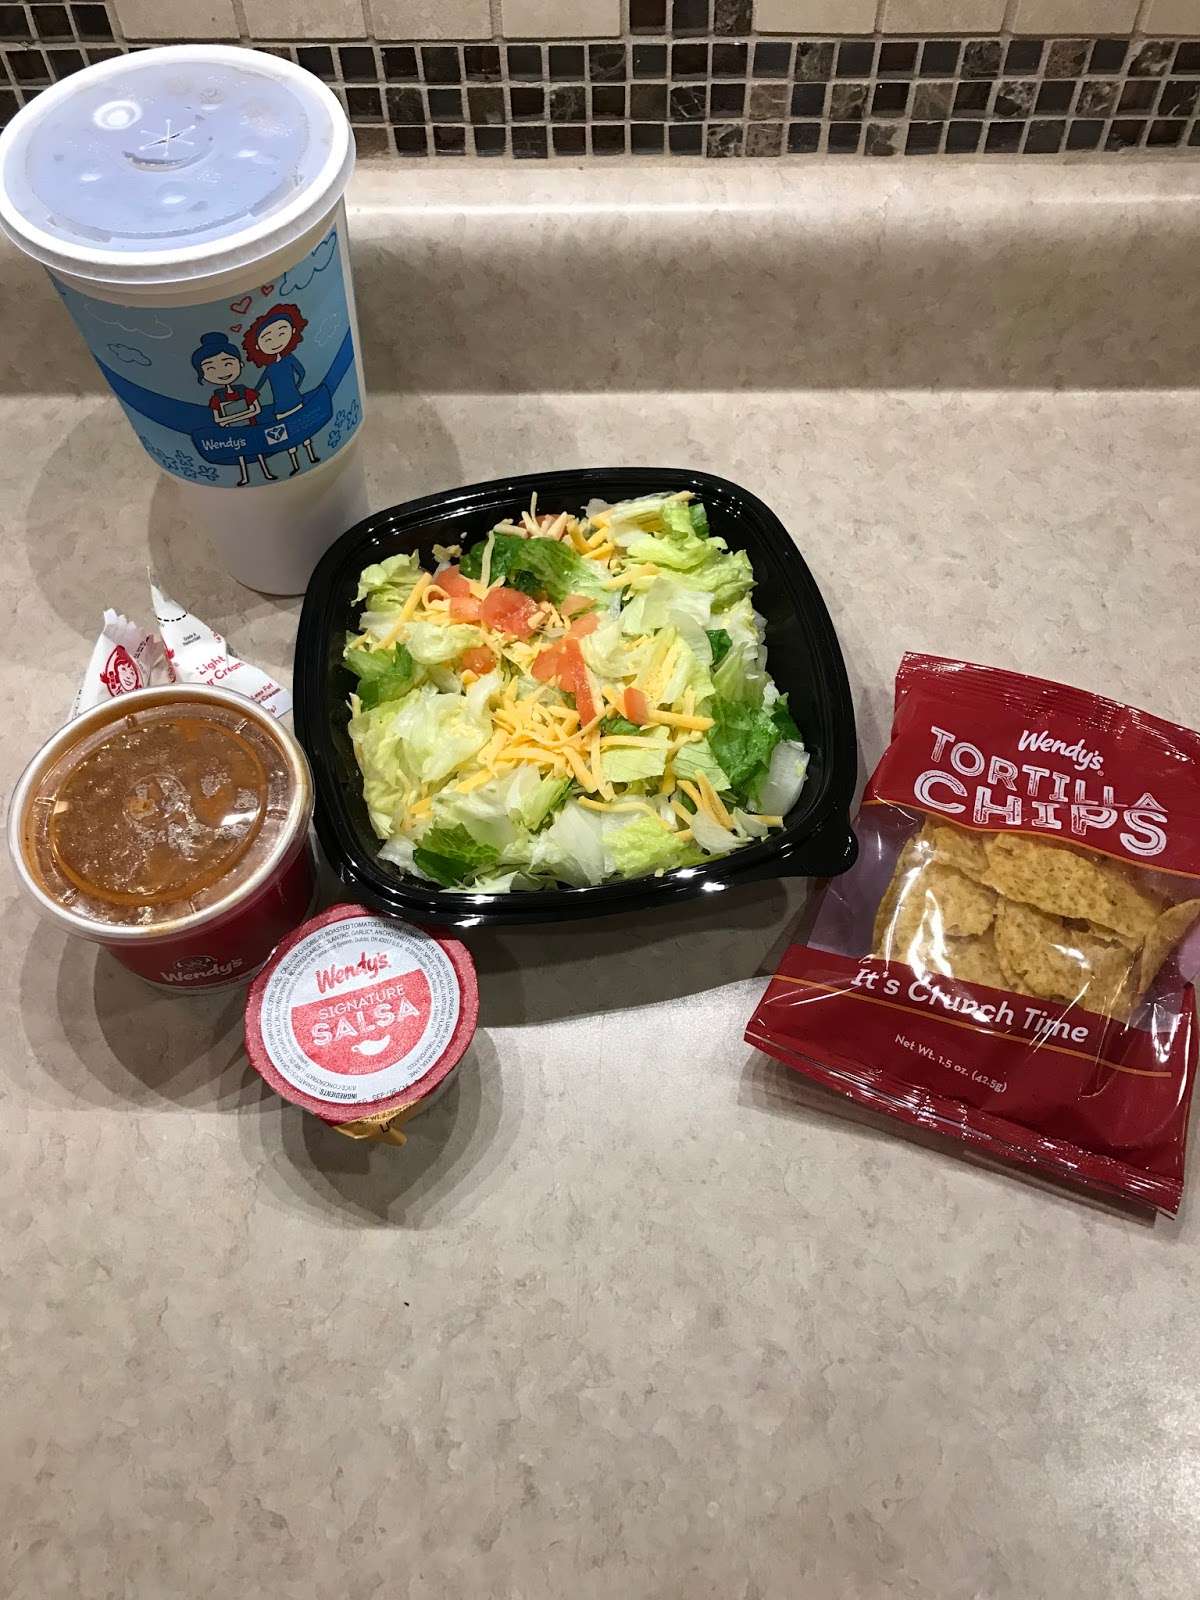 Living a Fit and Full Life: Wendys Taco Salad is Back!